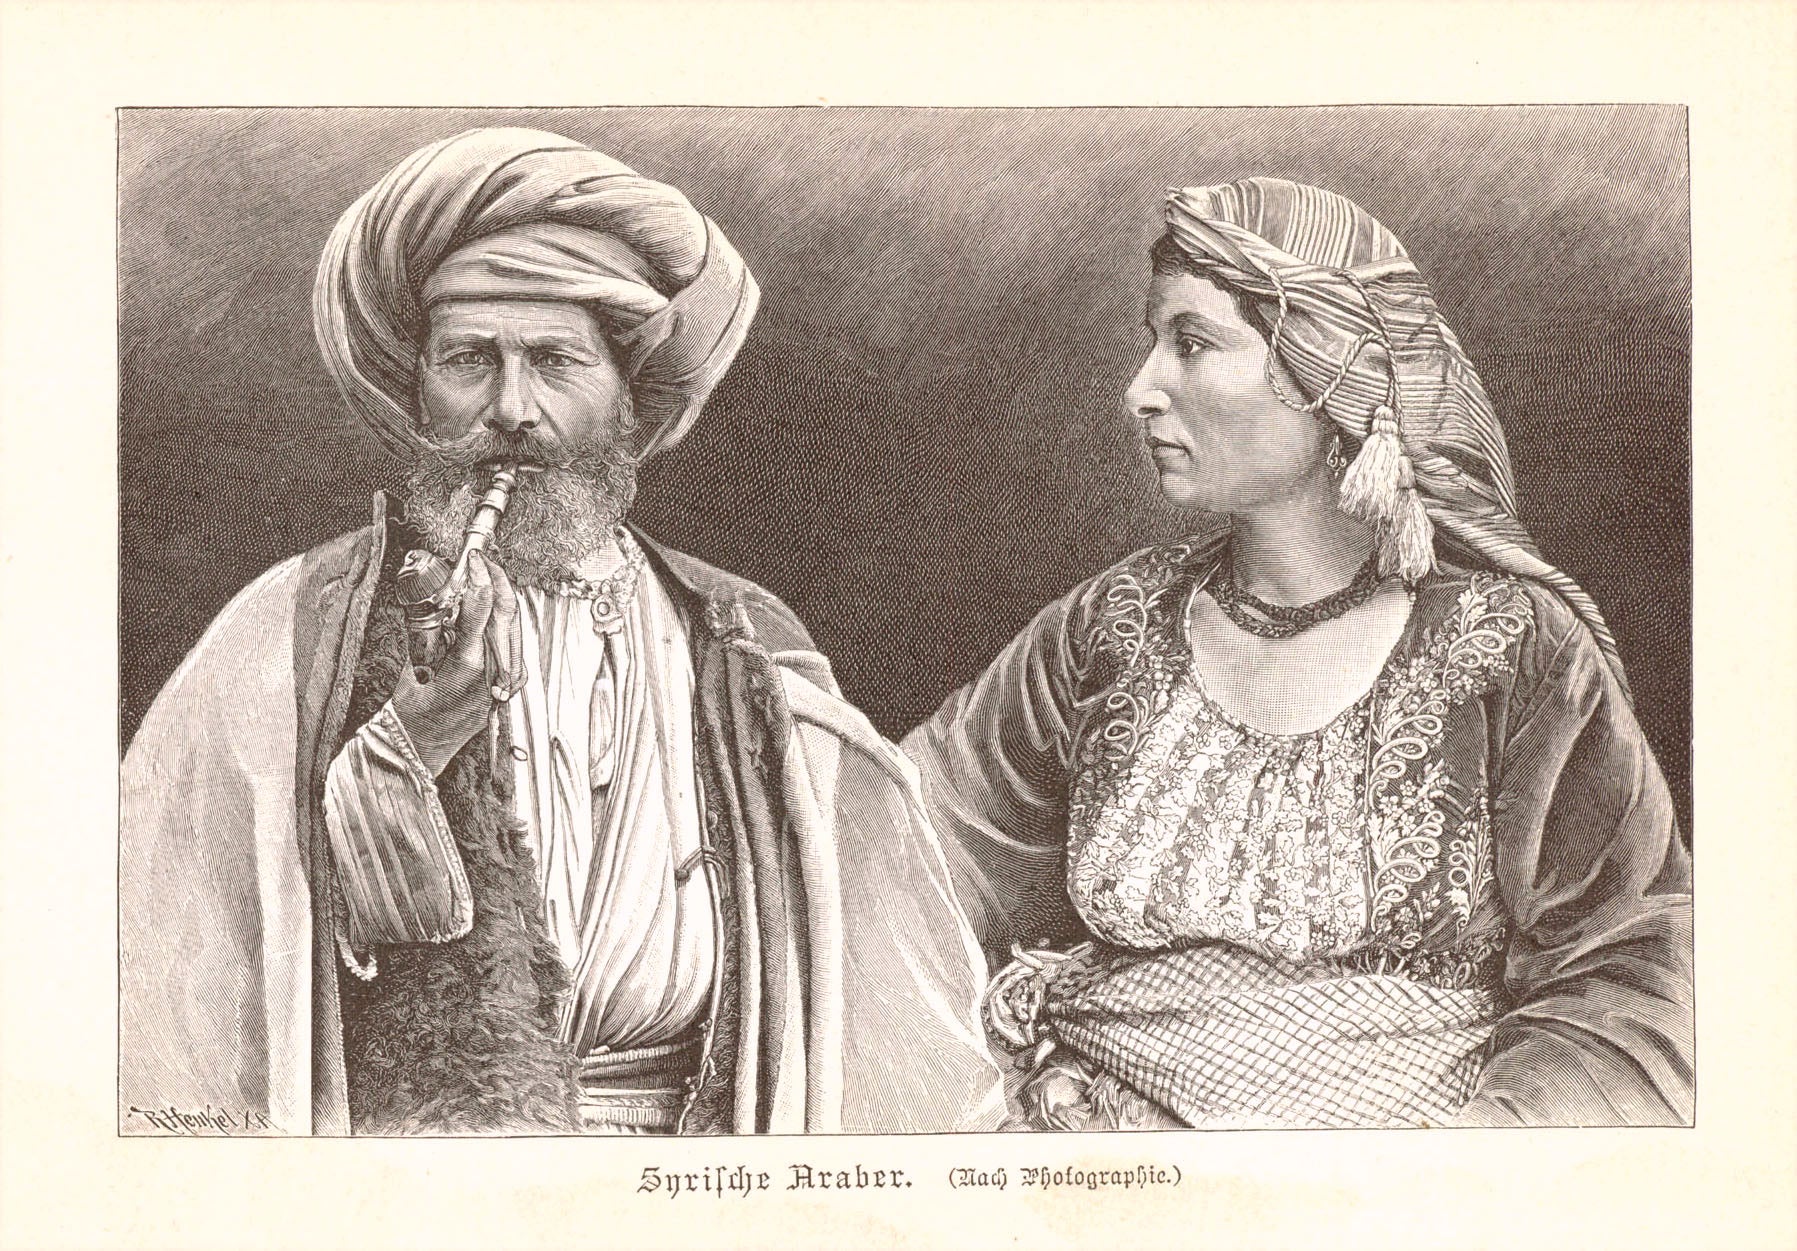 "Syrischer Araber"  Wood engraving made after a photograph, published 1890.